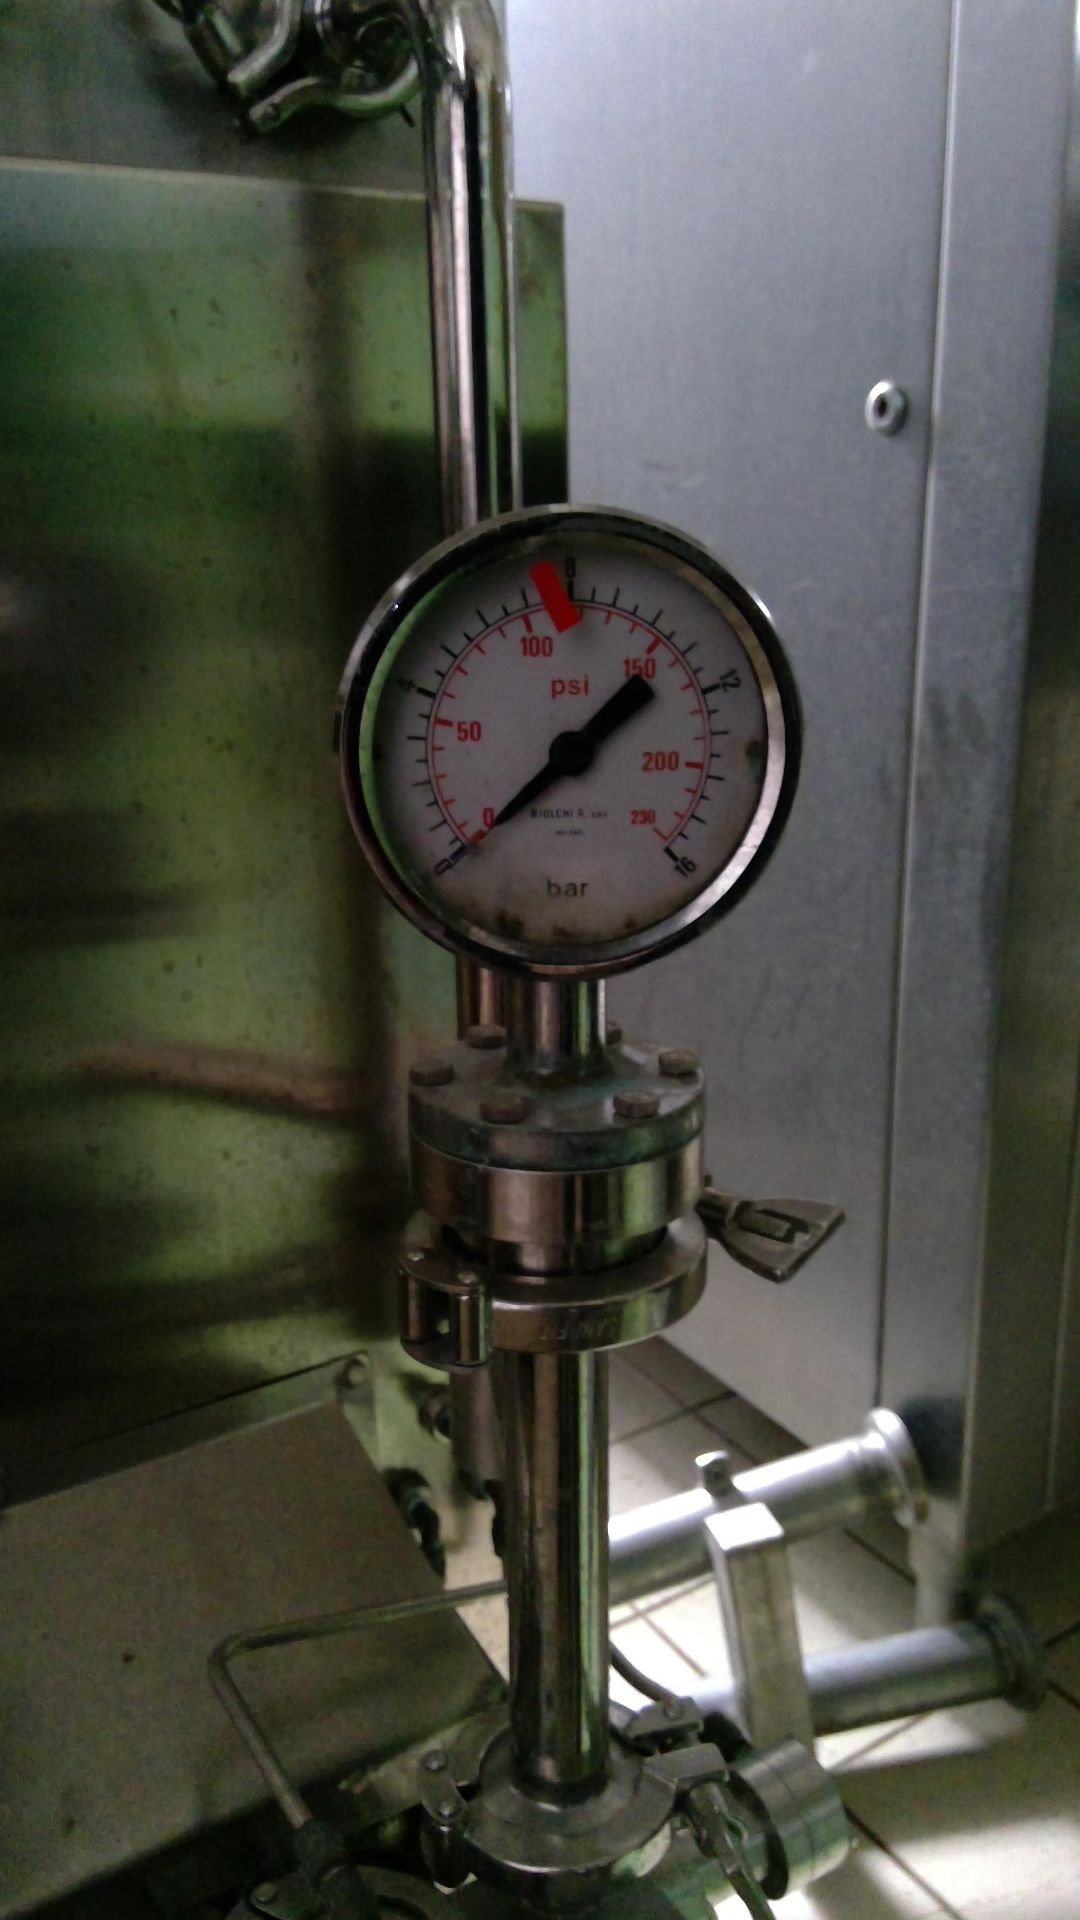 Continuous freezer TETRA PACK GM-1100, freon. 1996. LOCATION LITHUANIA - Image 3 of 6